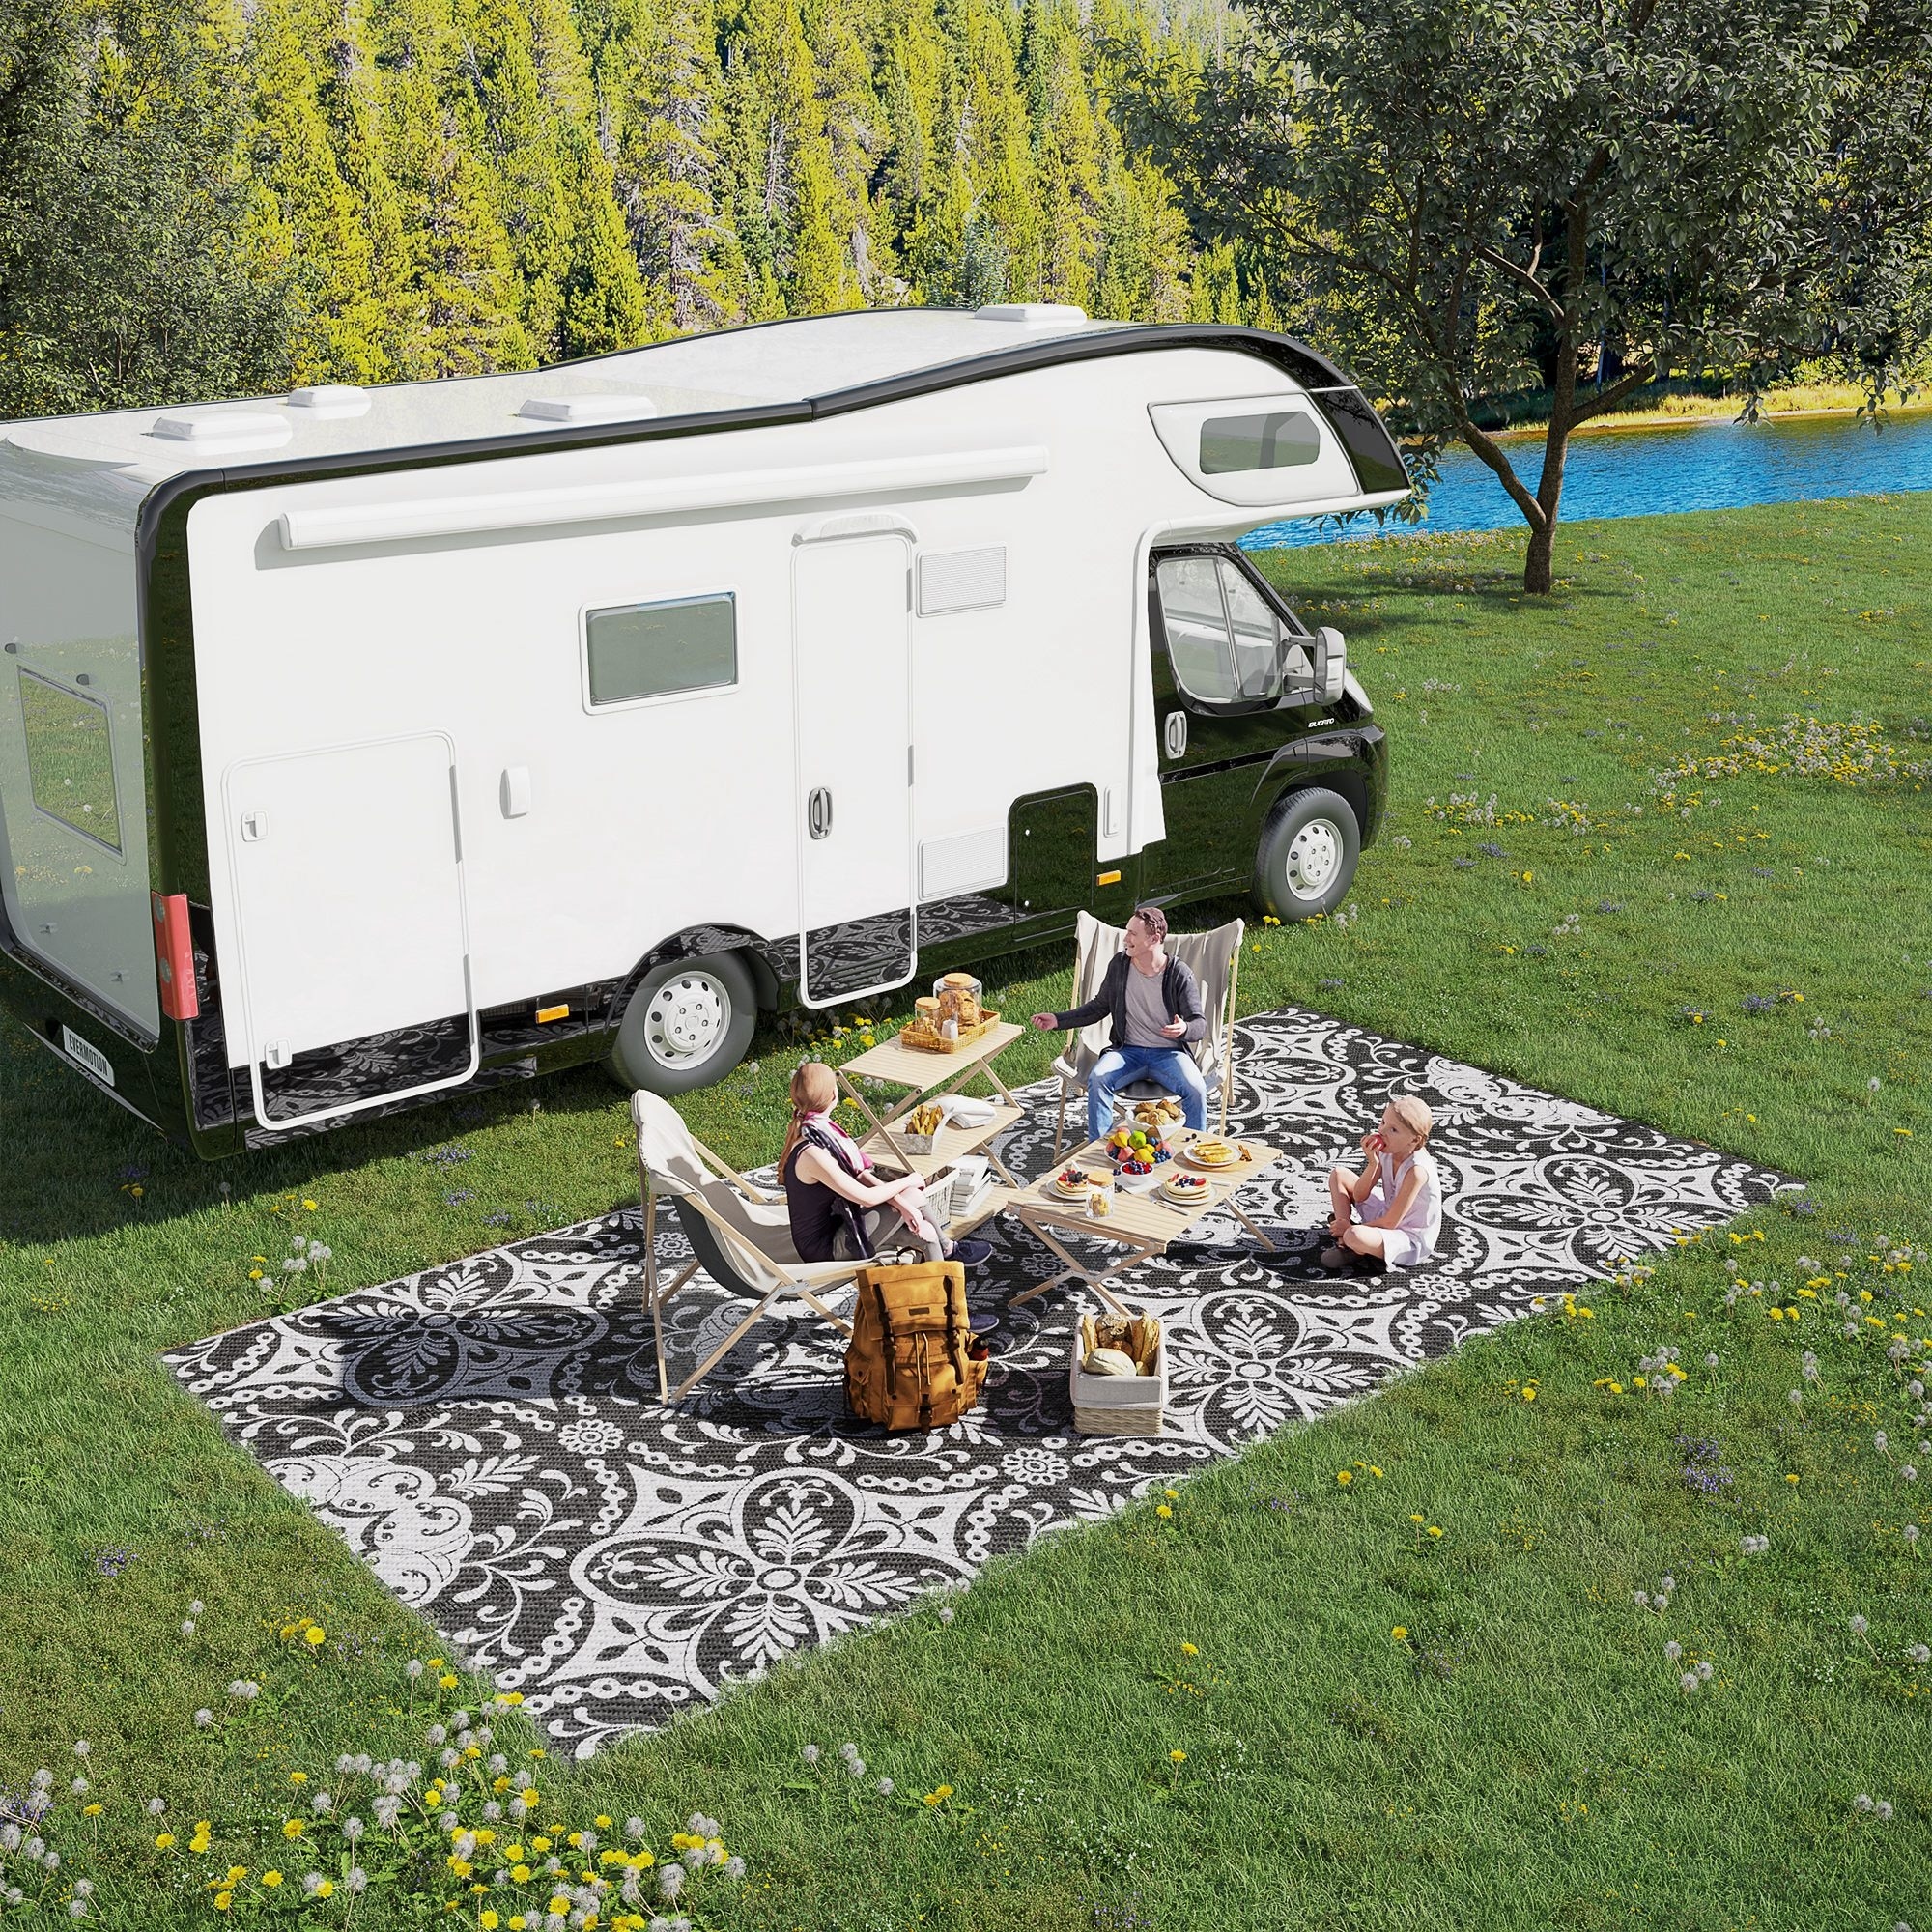 https://ak1.ostkcdn.com/images/products/is/images/direct/2eea82f16faa9a16d911d3c6451de7133cc6b1ba/Outsunny-RV-Mat%2C-Outdoor-Patio-Rug---Large-Camping-Carpet-with-Carrying-Bag%2C-9%27-x-18%27%2C-Waterproof-Plastic-Straw.jpg